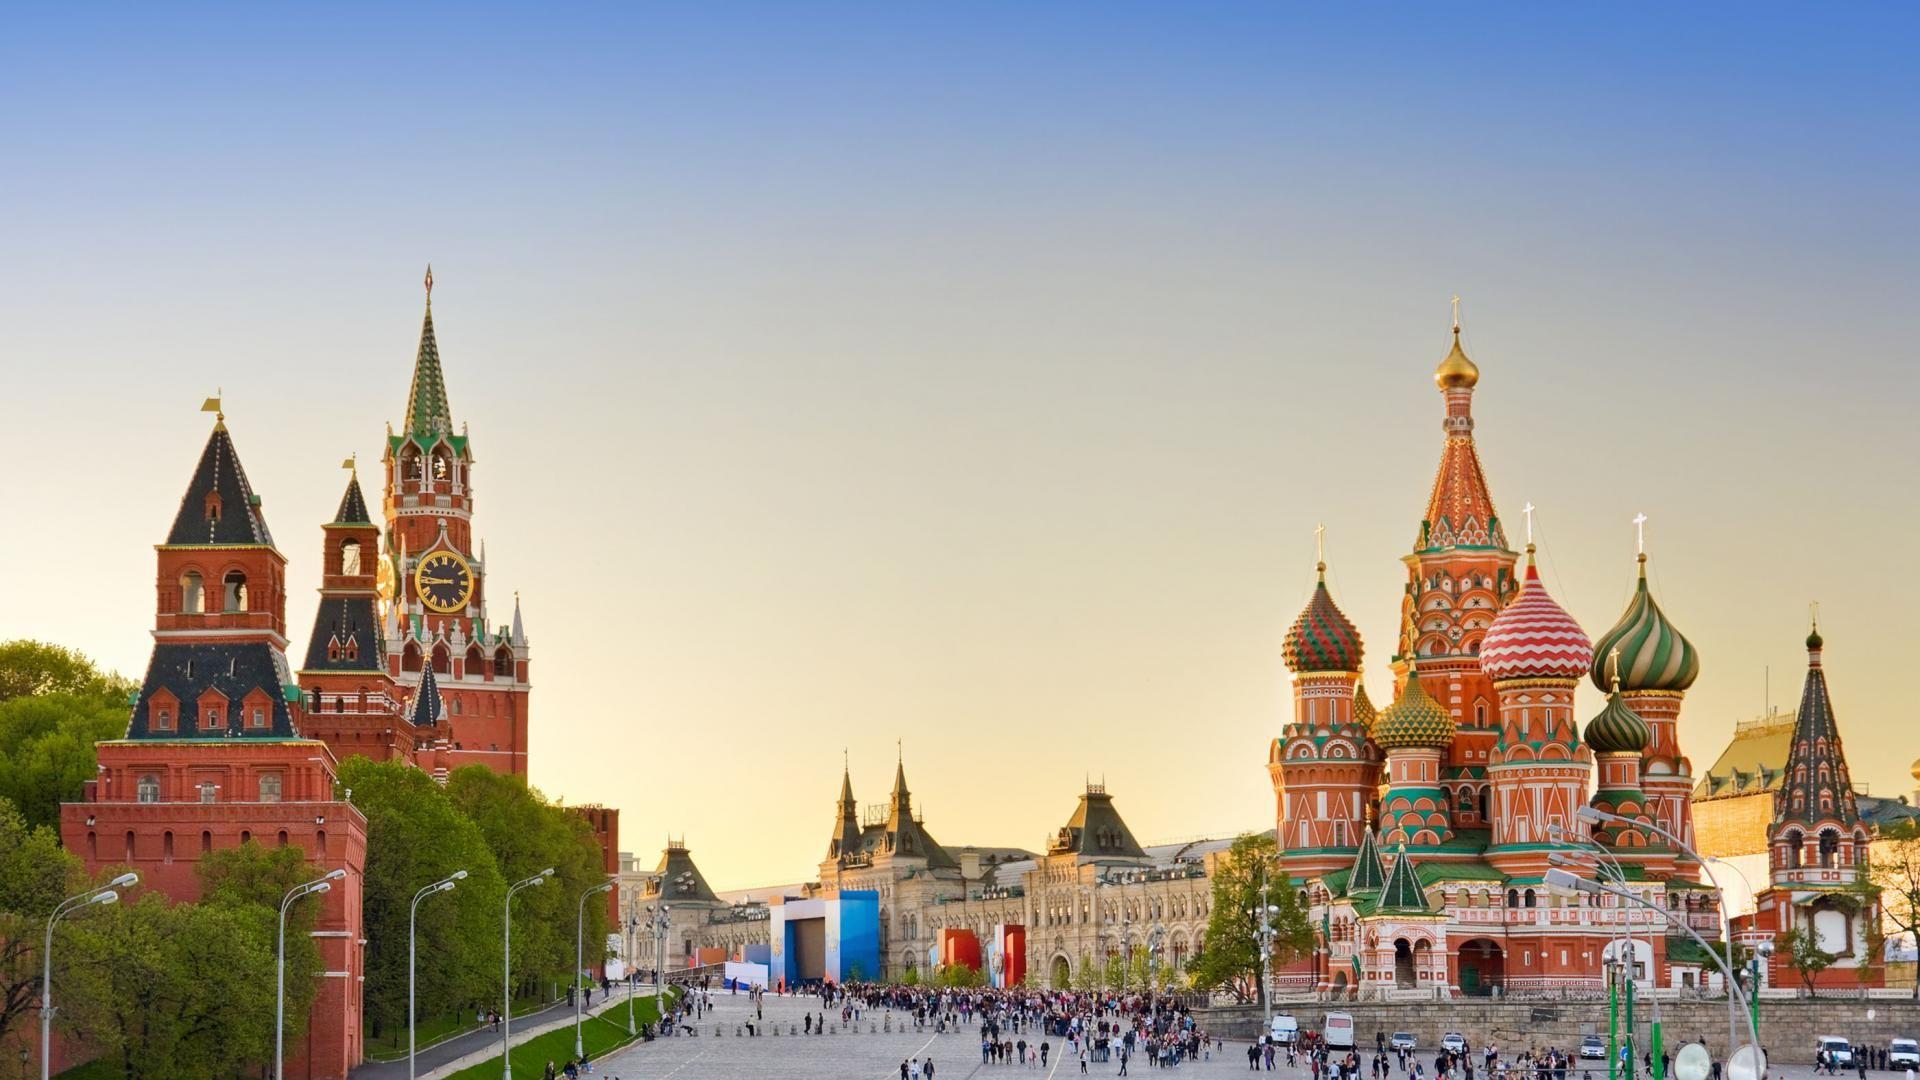 Red Square Moscow Russia HD Wallpaper in 2019